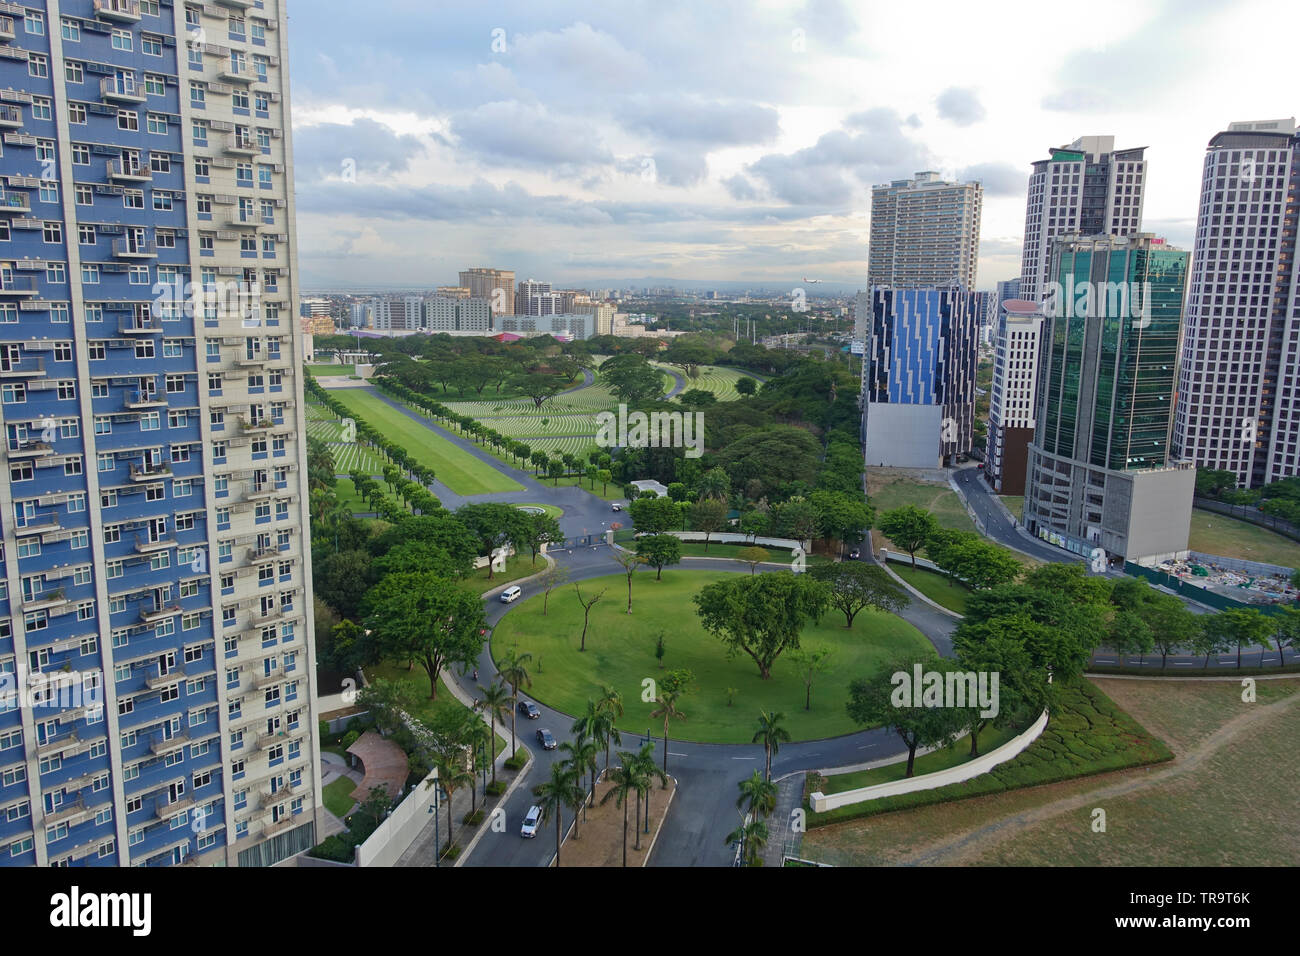 Bonifacio Global City, Metro Manila, Philippines is a financial, commercial and residential hub in Metro Manila not far from Makati. Very cosmopolitan. Stock Photo